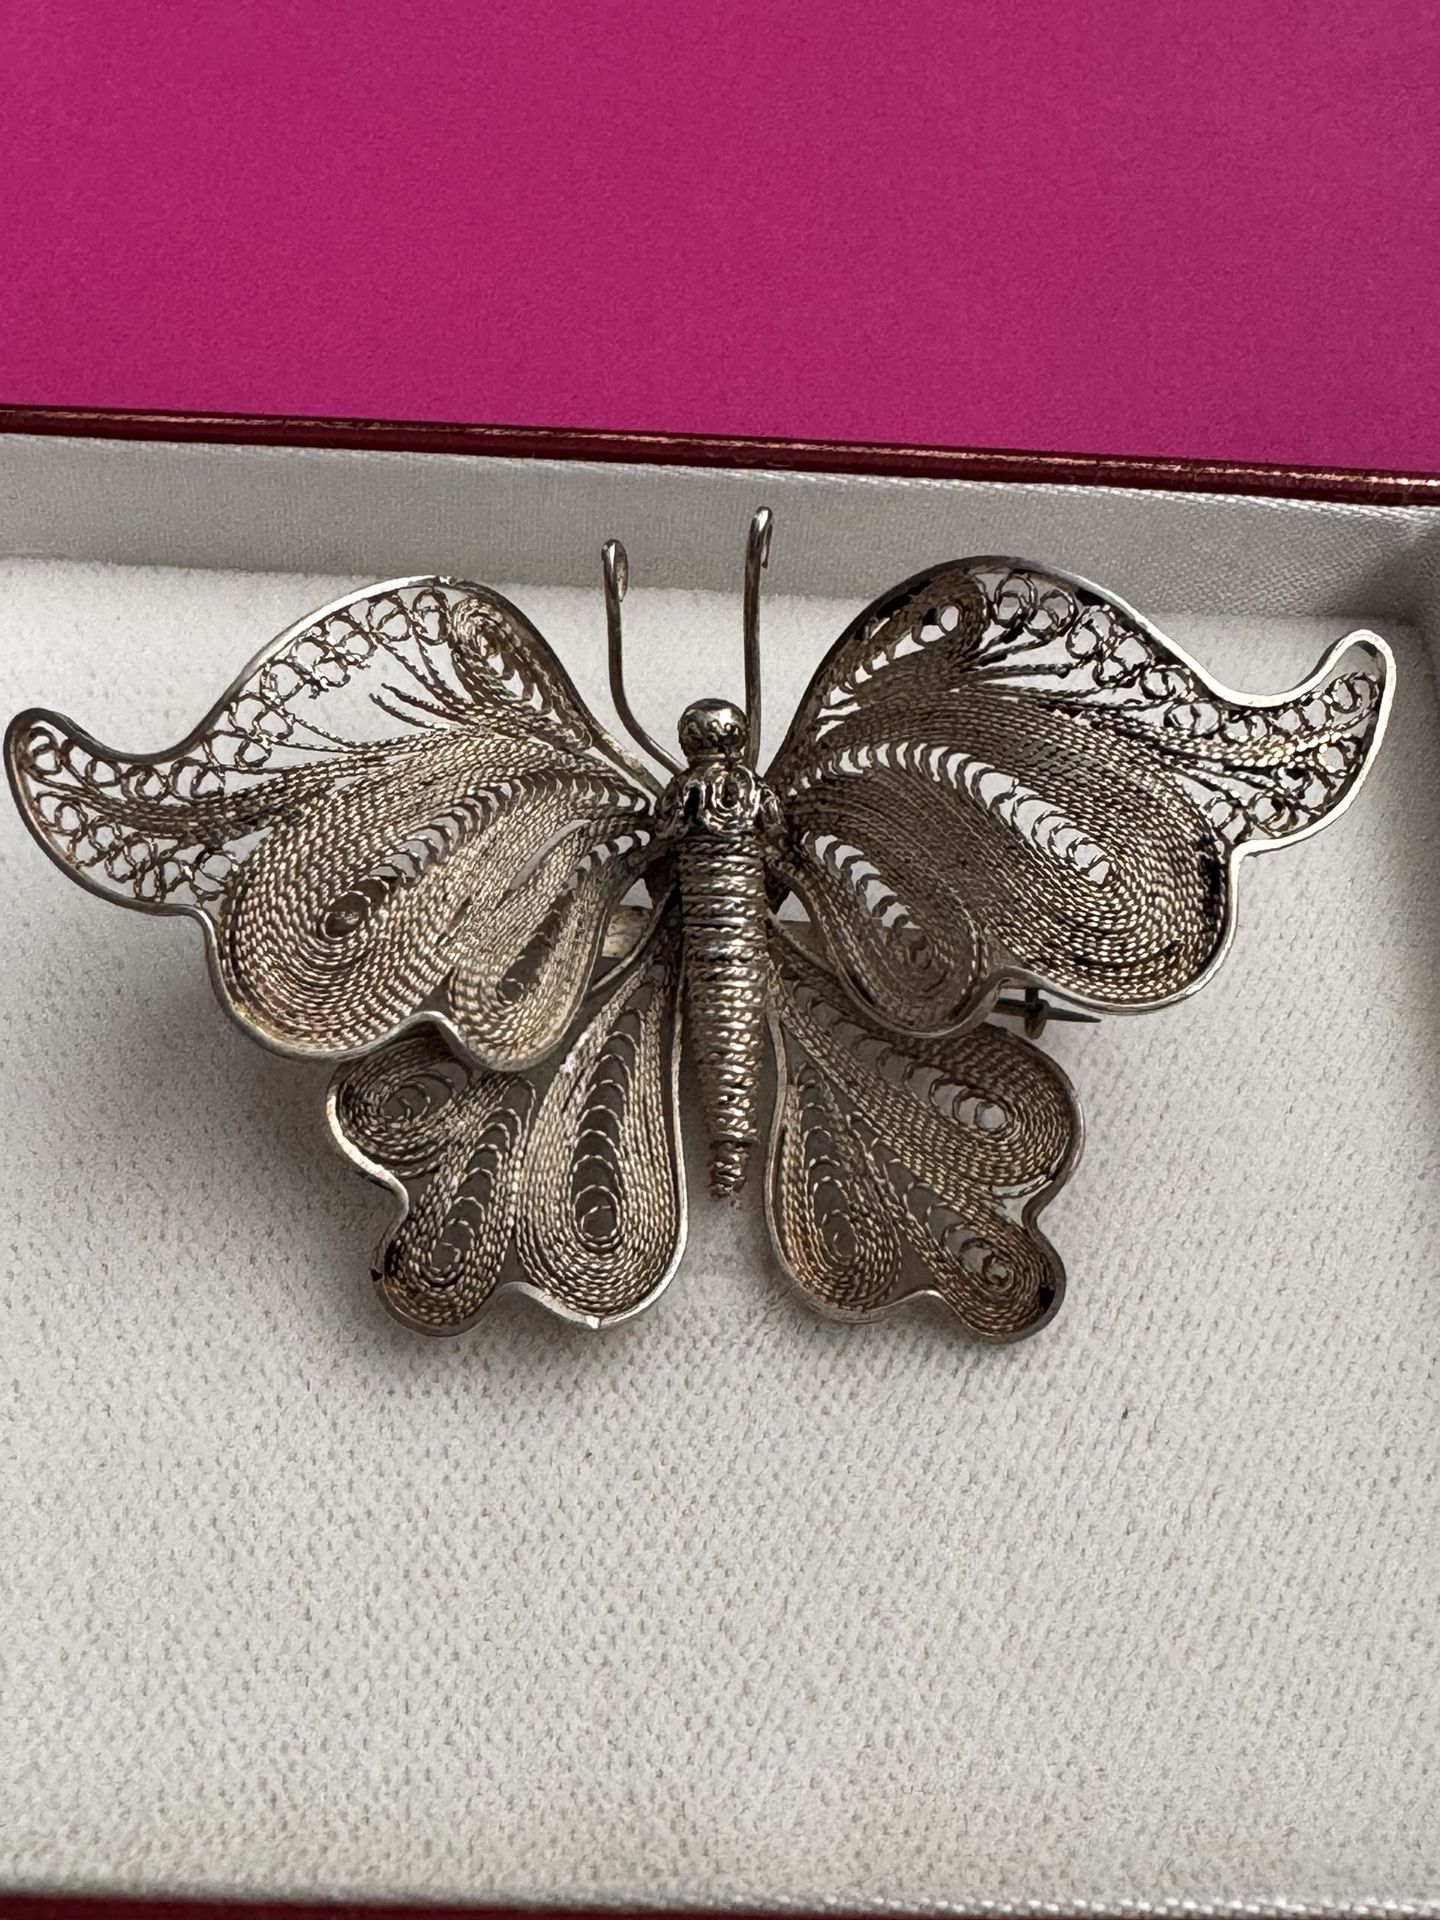 Vintage Sterling Silver BROOCH PIN 925 Butterfly  Measures approx 1.5” H x 2.5” W In good condition